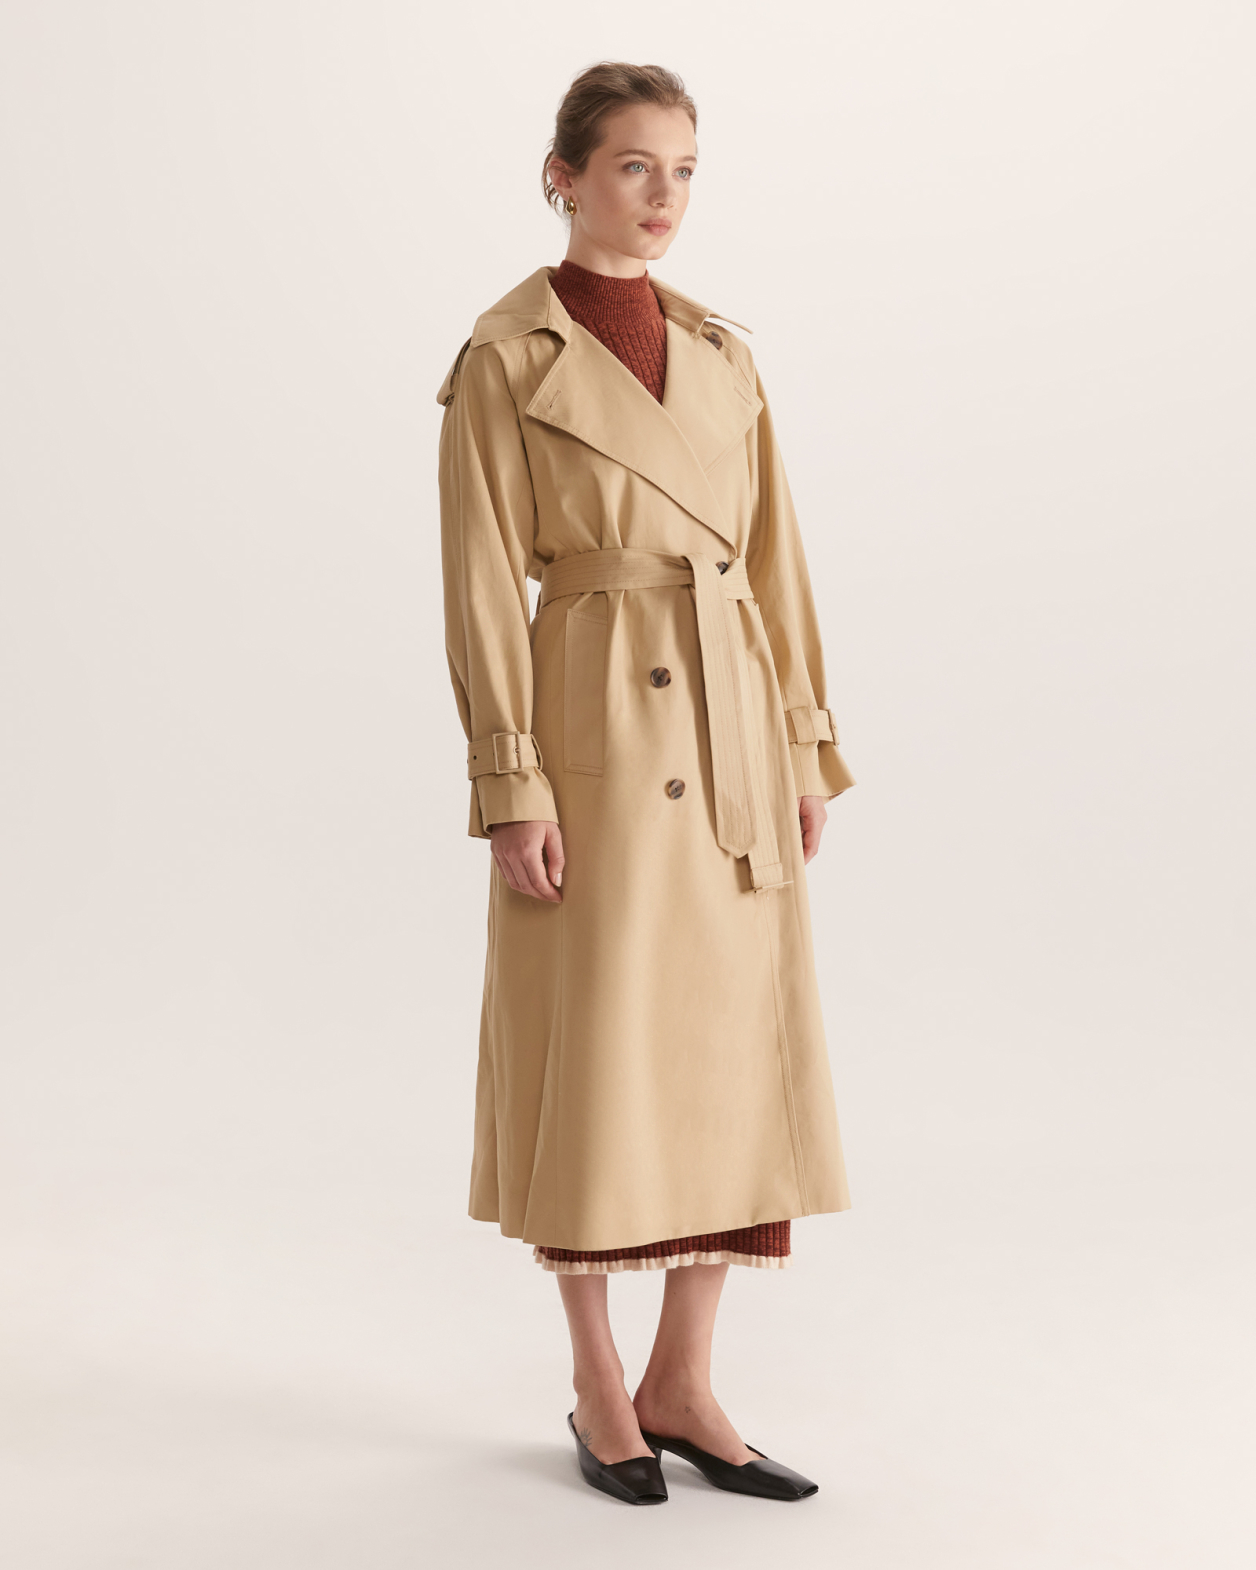 Lana Trench Coat in CAPPUCCINO